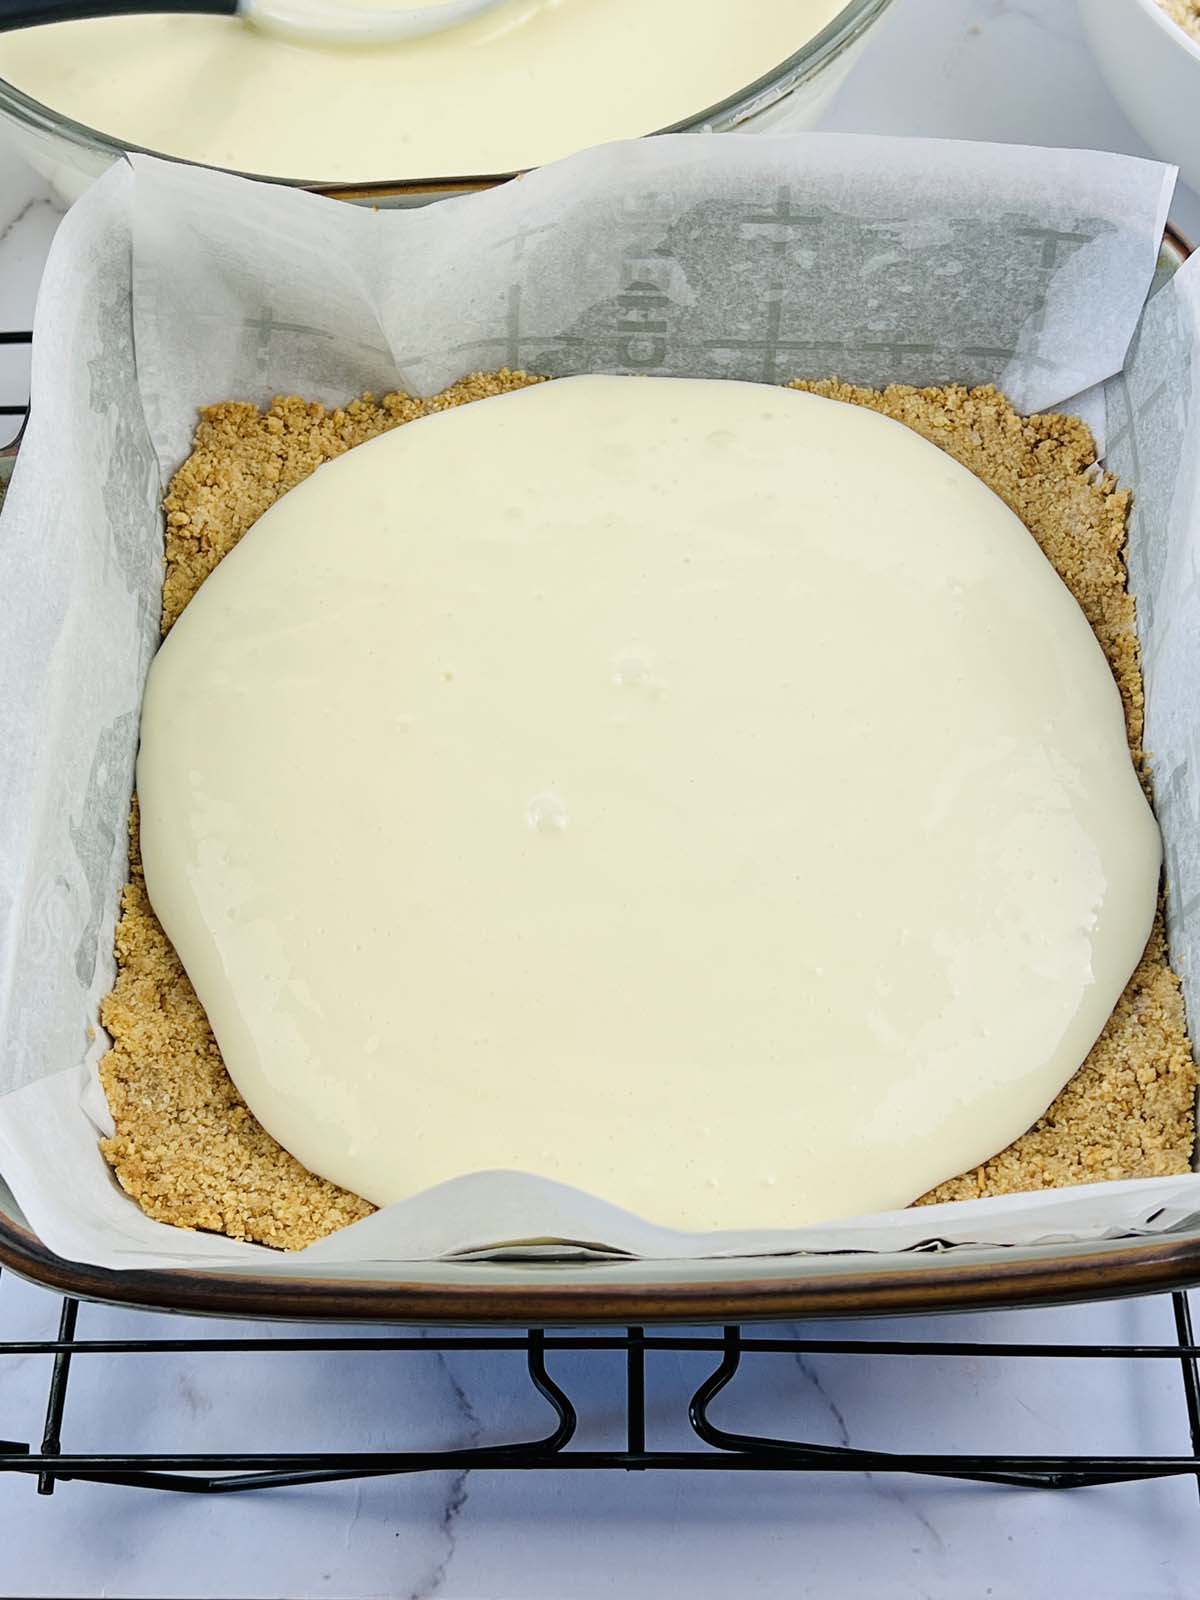 Cheesecake filling poured over the crust.